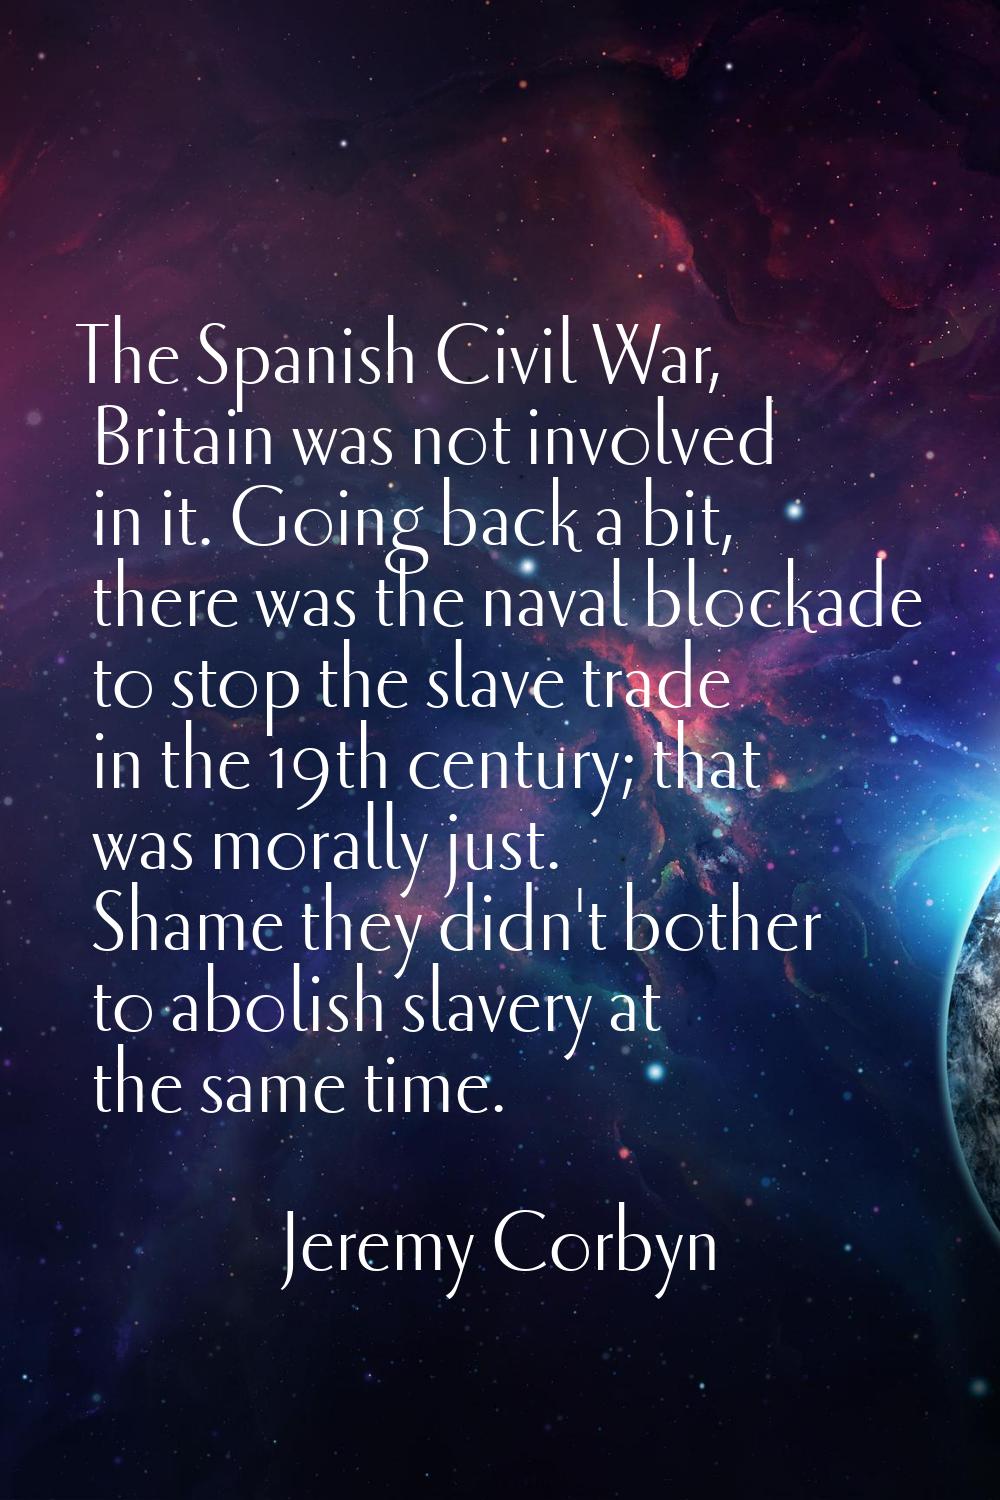 The Spanish Civil War, Britain was not involved in it. Going back a bit, there was the naval blocka